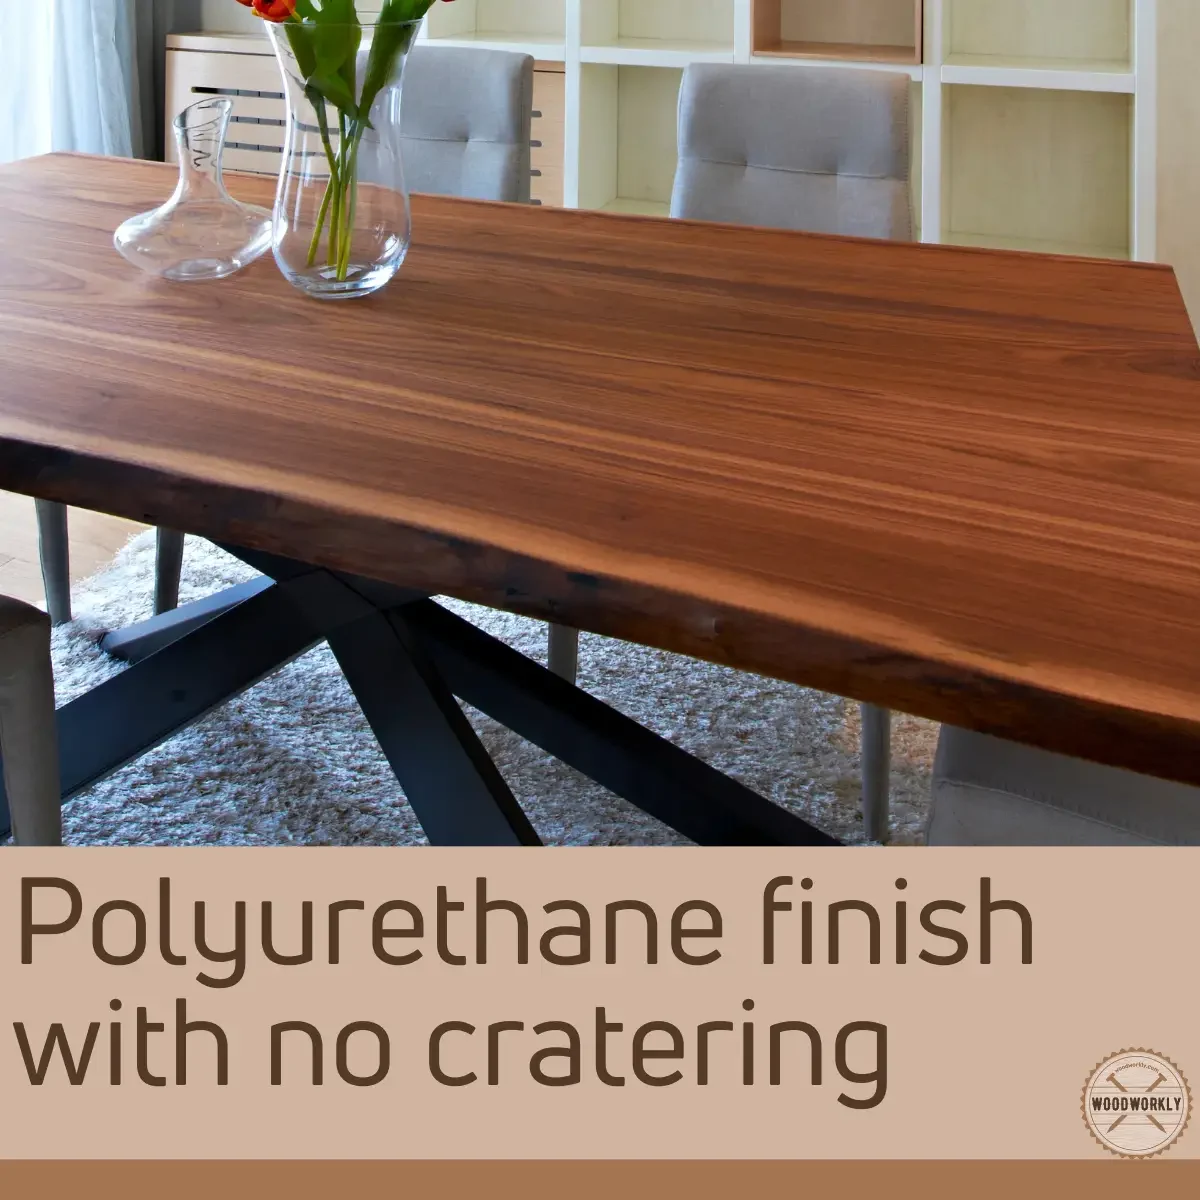 Polyurethane finish with no cratering